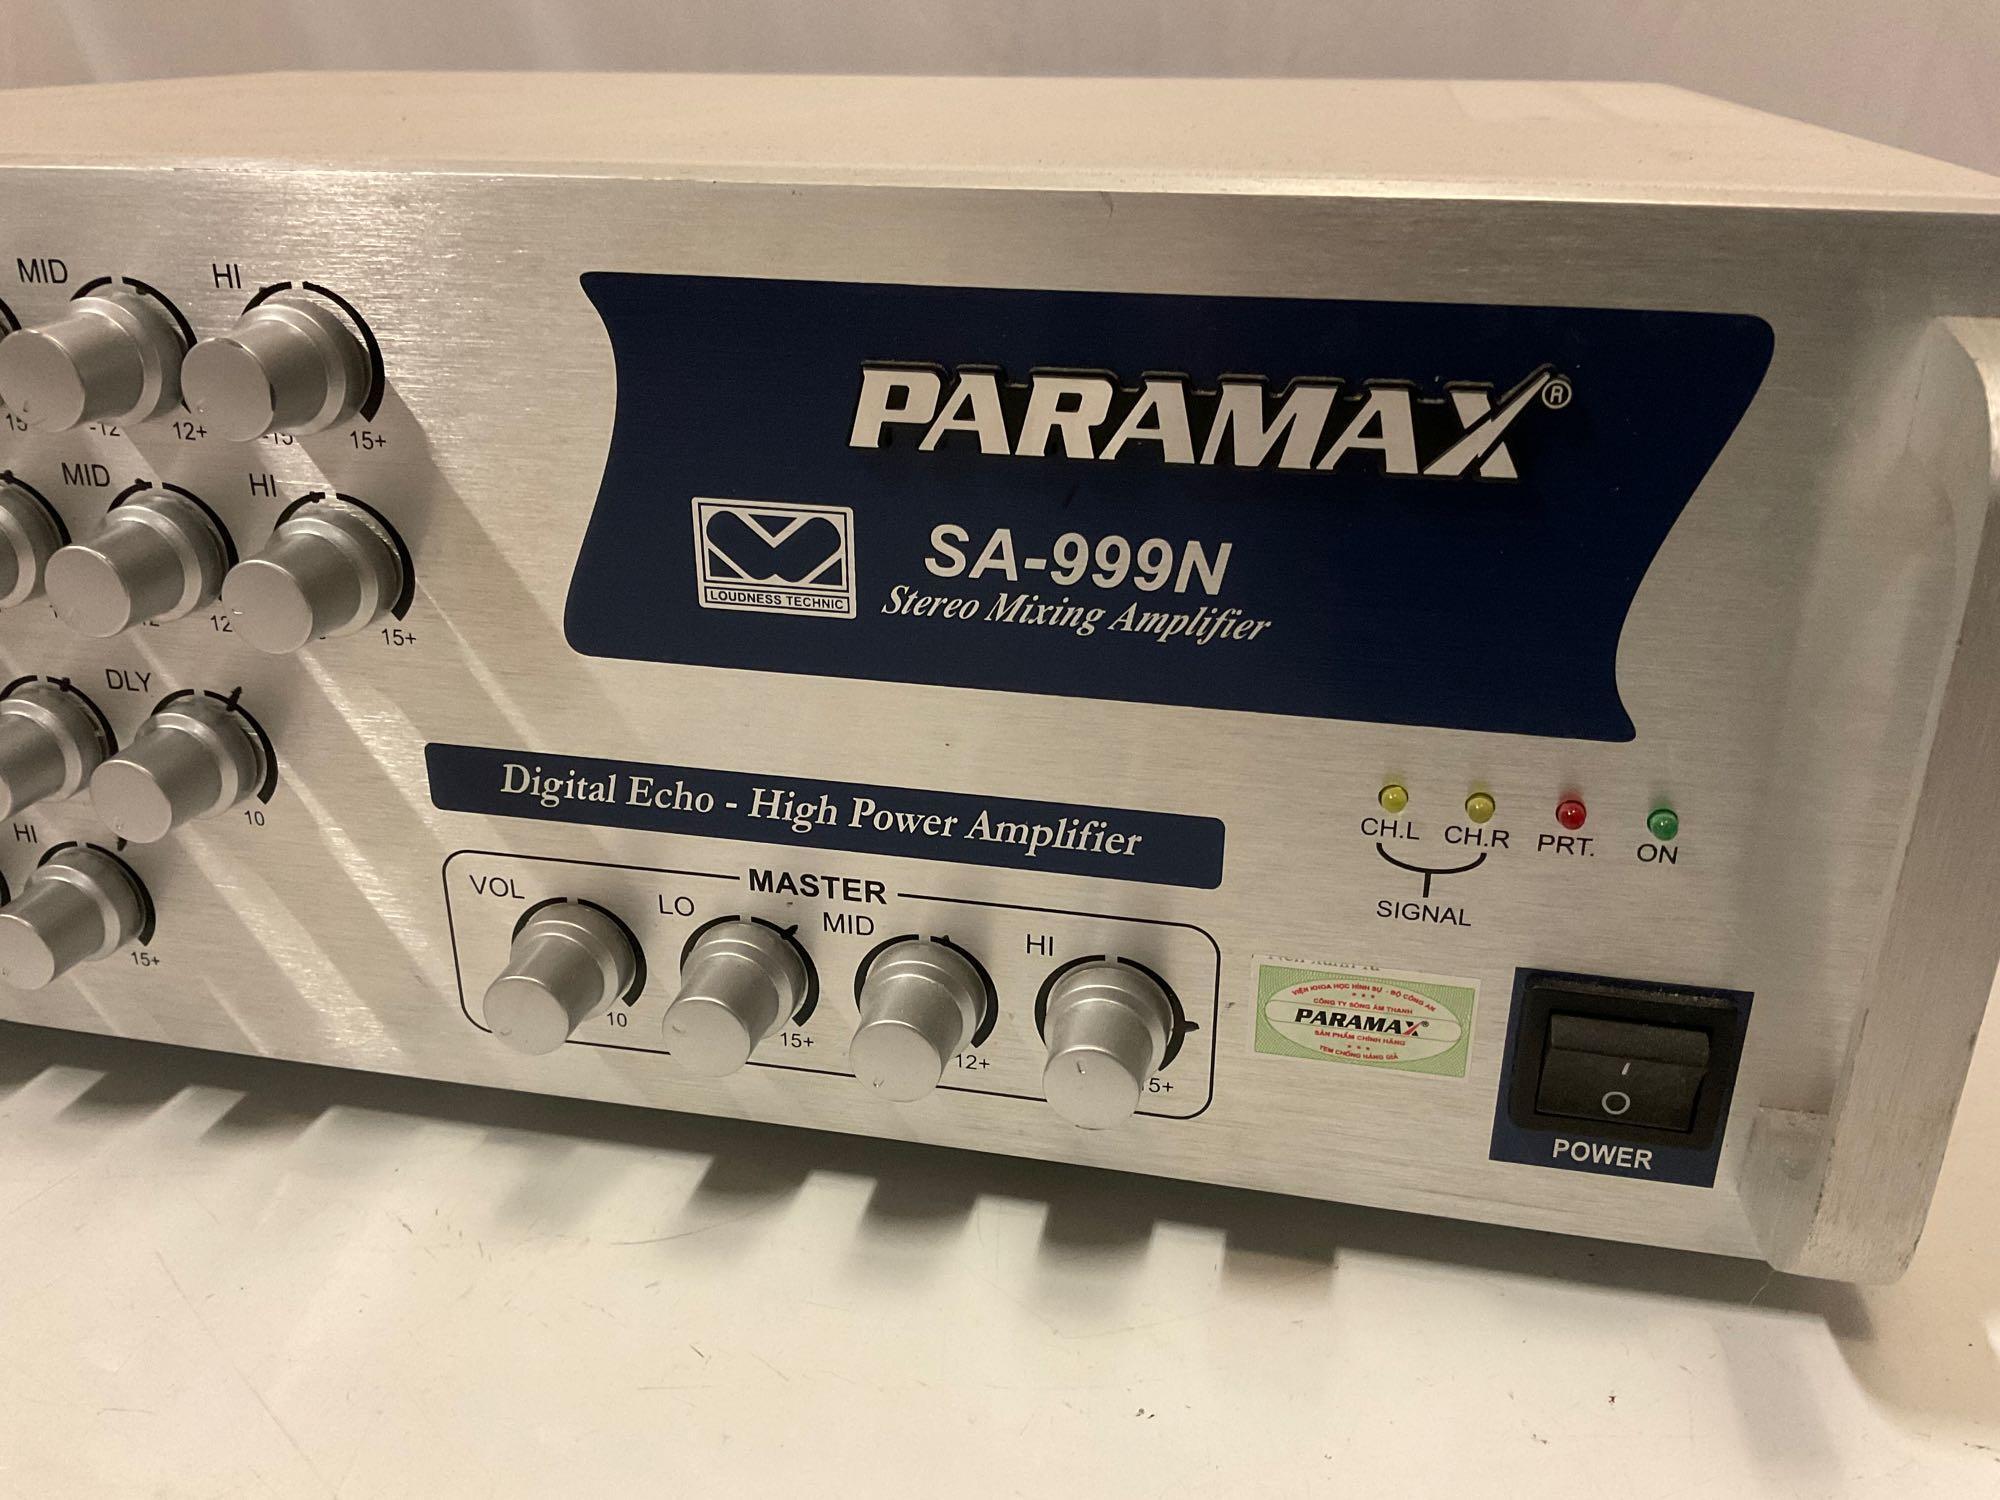 PARAMAX SA-999N Stereo Mixing Amplifier w/ Digital Echo, Region 2 cord, sold as is